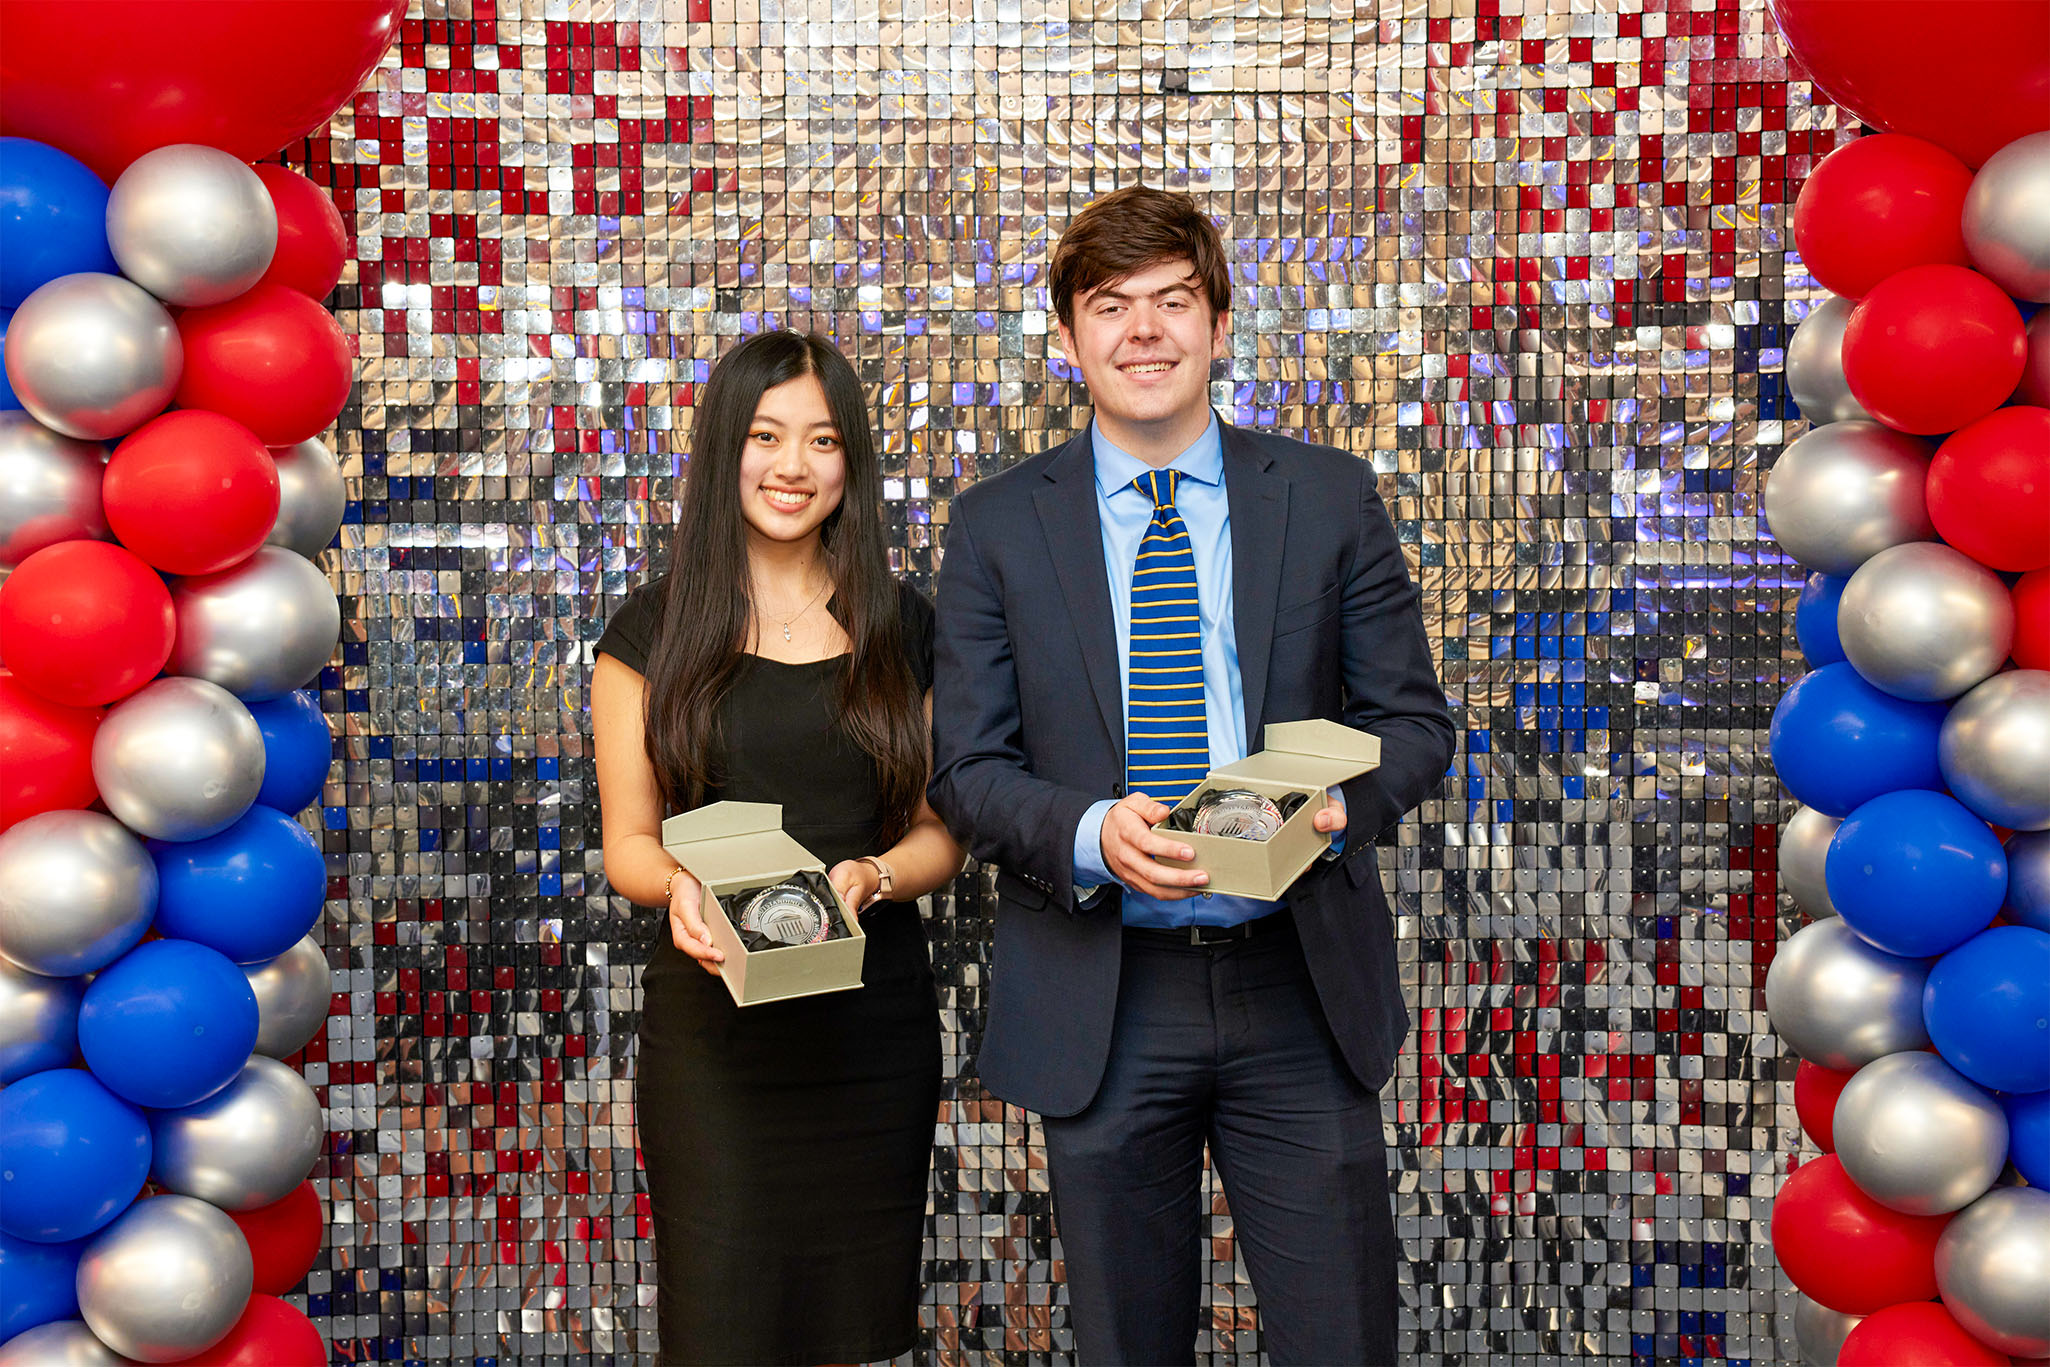 Outstanding Senior Awards Spring 2023, two students holding awards standing in front of silver backdrop with red, blue, and silver balloons